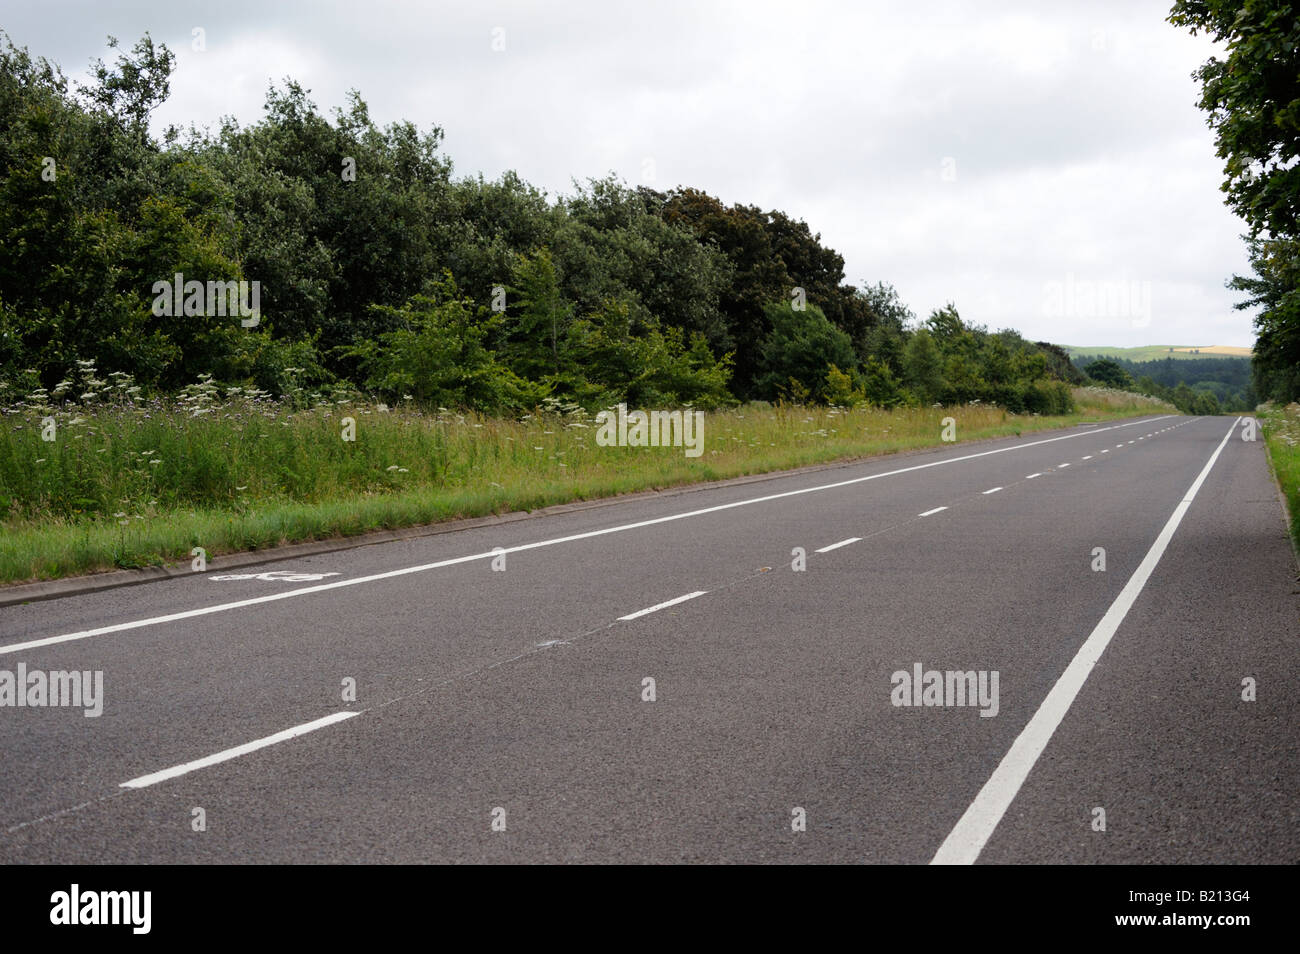 Straight tarmac road, two-way, with cycle lane. Dumfries and Galloway, Scotland, United Kingdom, Europe. Stock Photo